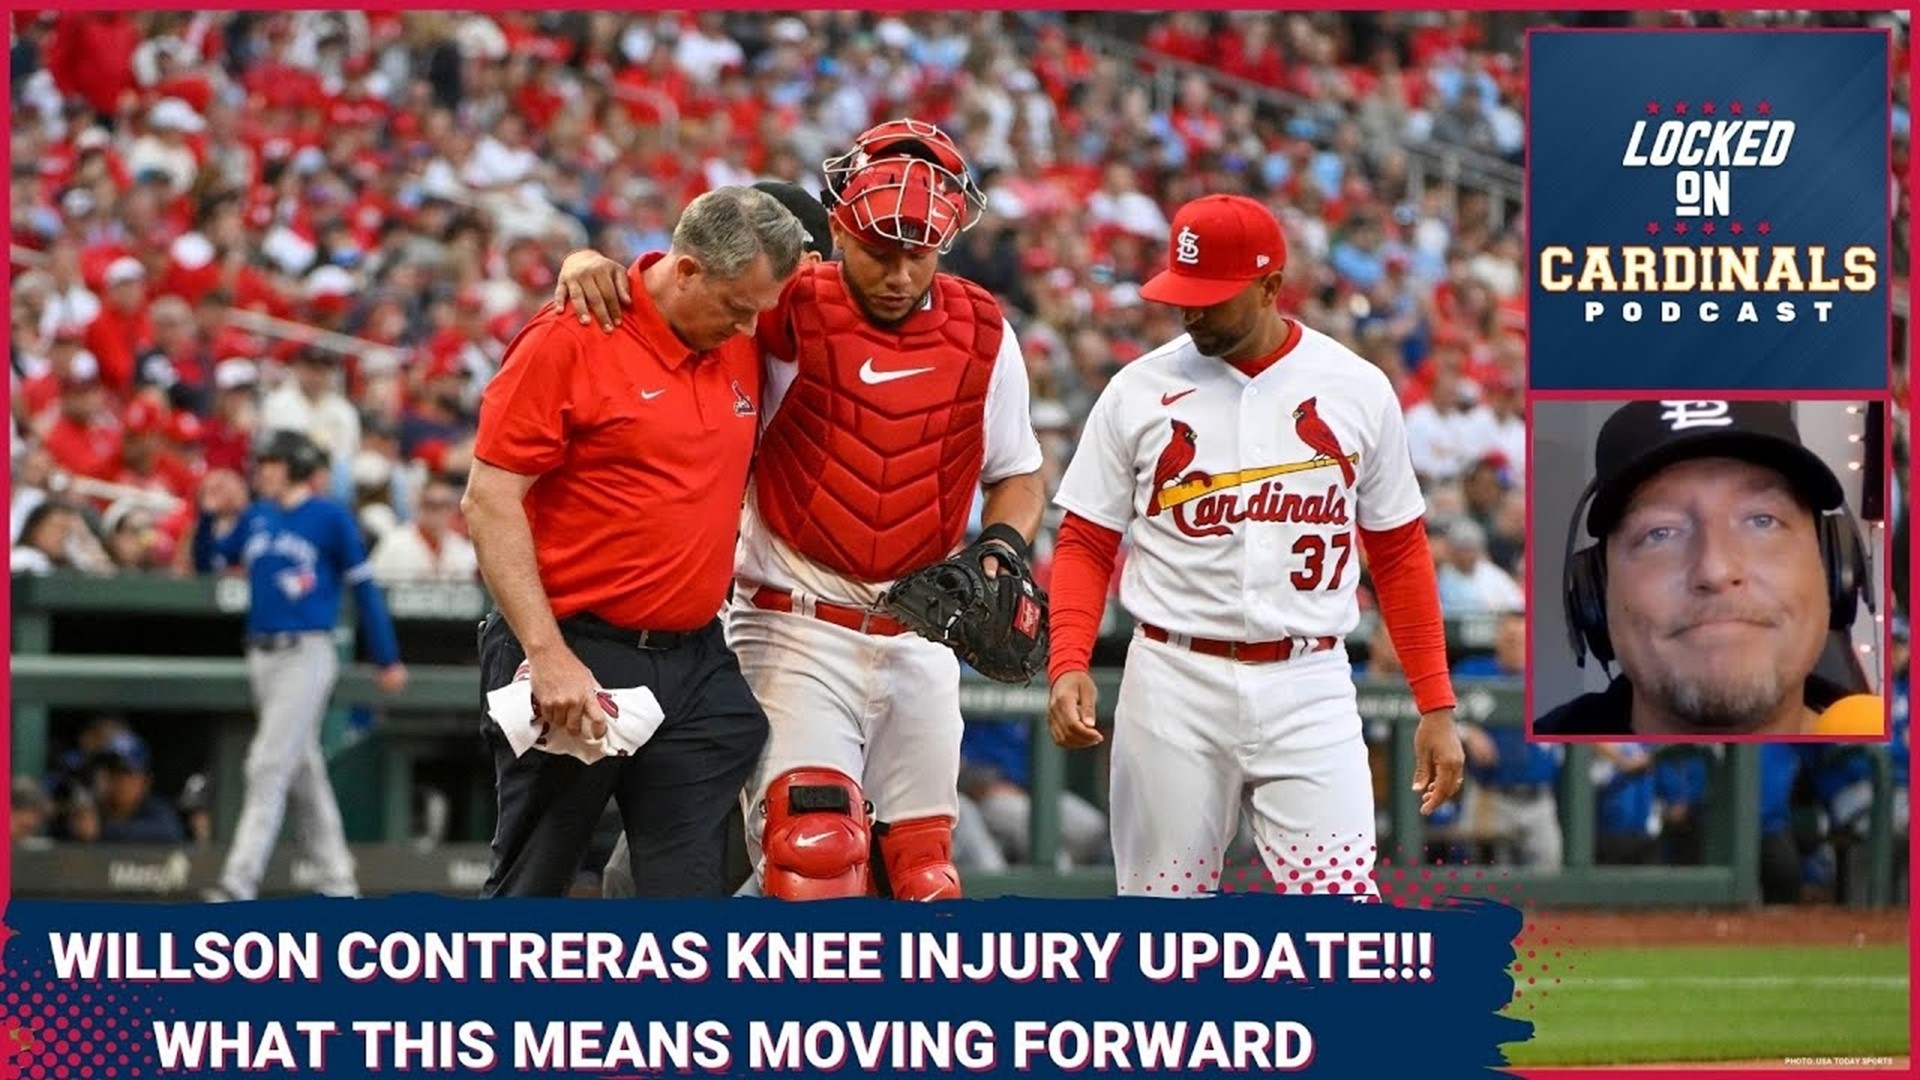 Update on the knee injury to St. Louis Cardinals catcher Willson Contreras, breakdown of Opening Day